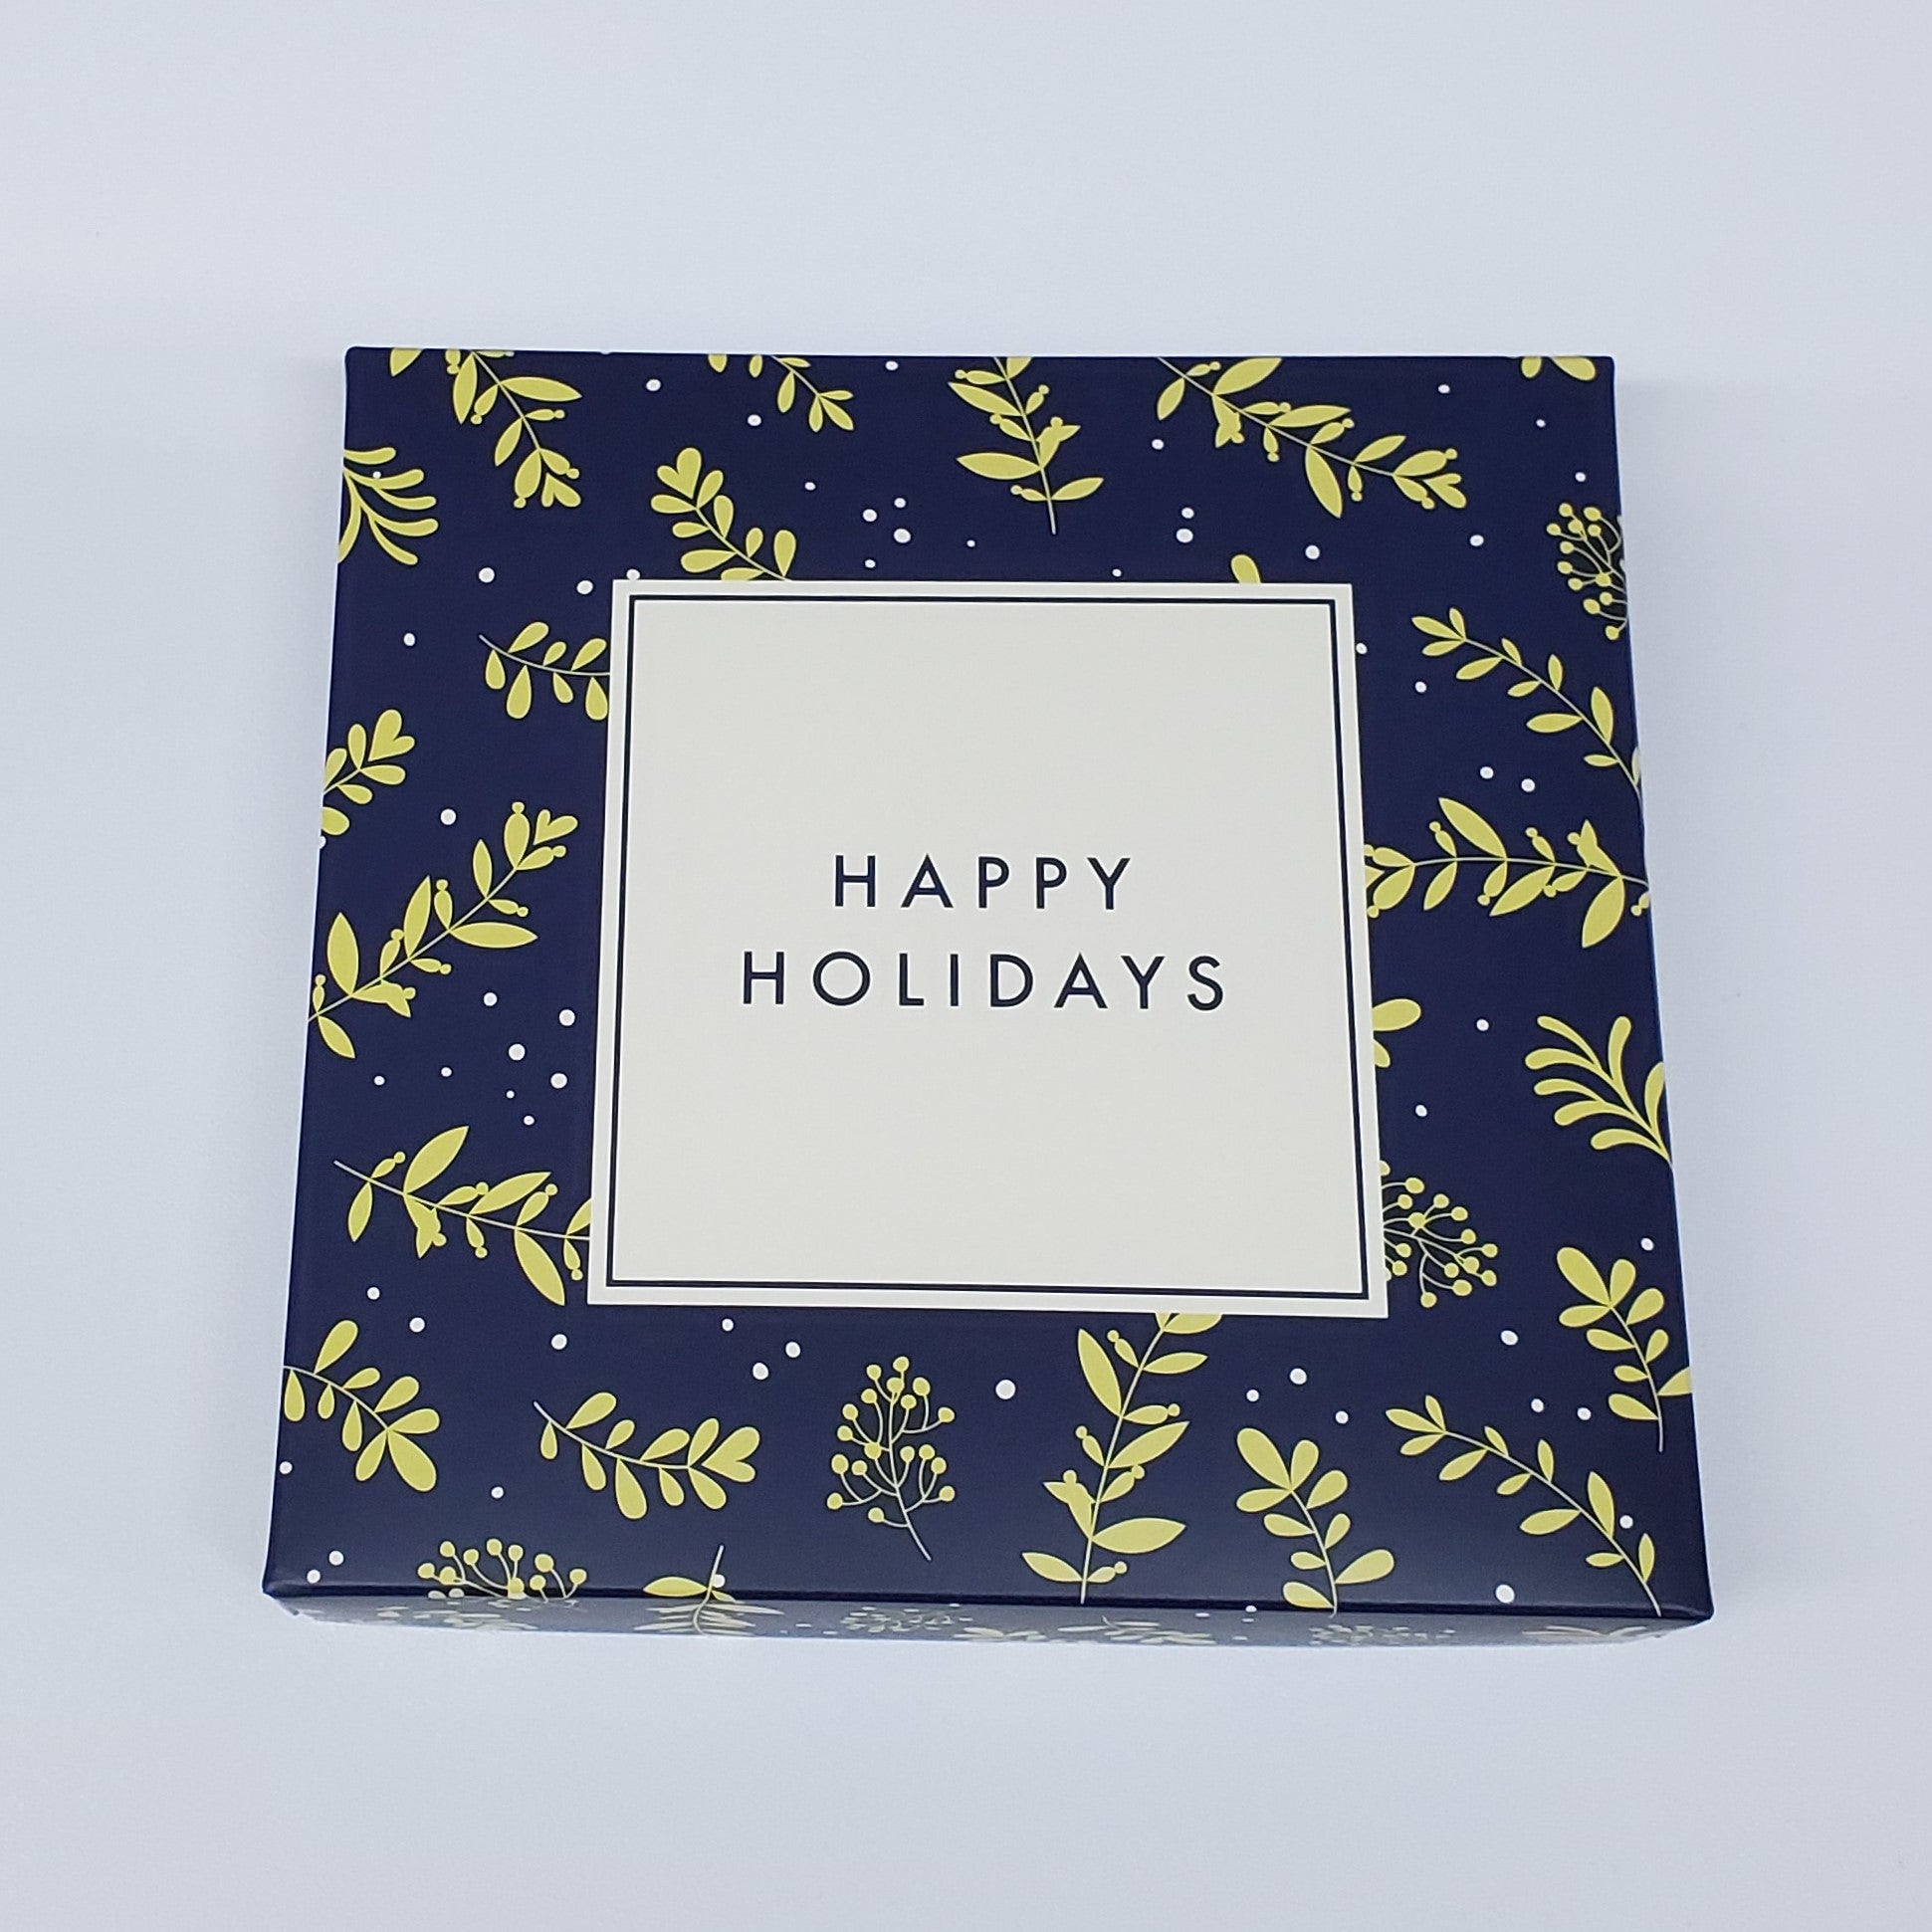 Happy Holidays Themed Box Cover for 16 Piece Holiday Assortment